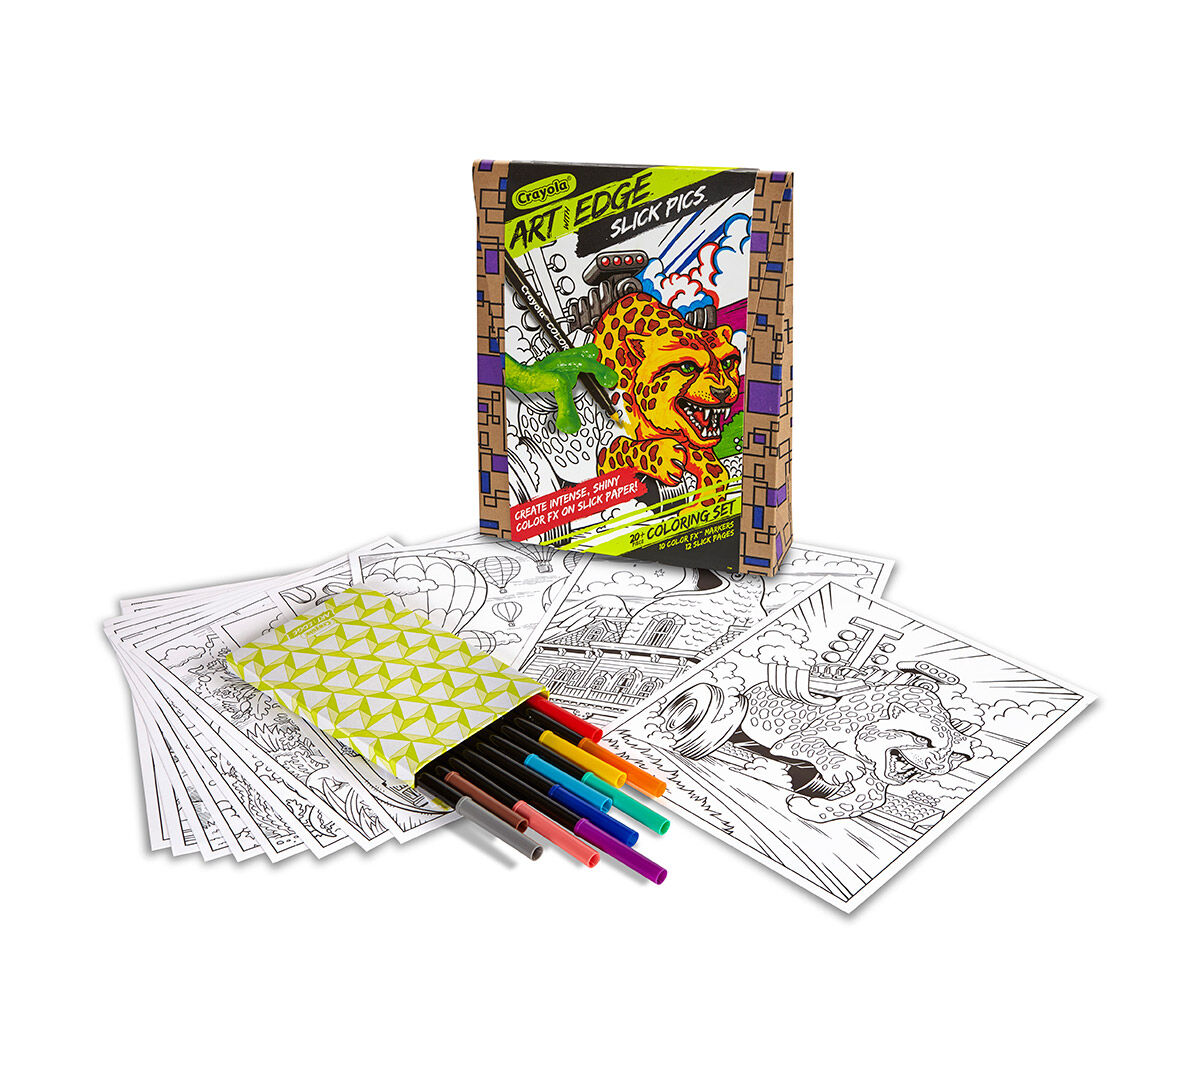 <p>Get ready to color like never before with the Crayola Art with Edge Slick Pics Coloring Set. This coloring set features proprietary smooth Slick Pics paper that yields bold, intense colors and Color FX markers that lay down brilliantly bright hues to bring your coloring to life.</p>